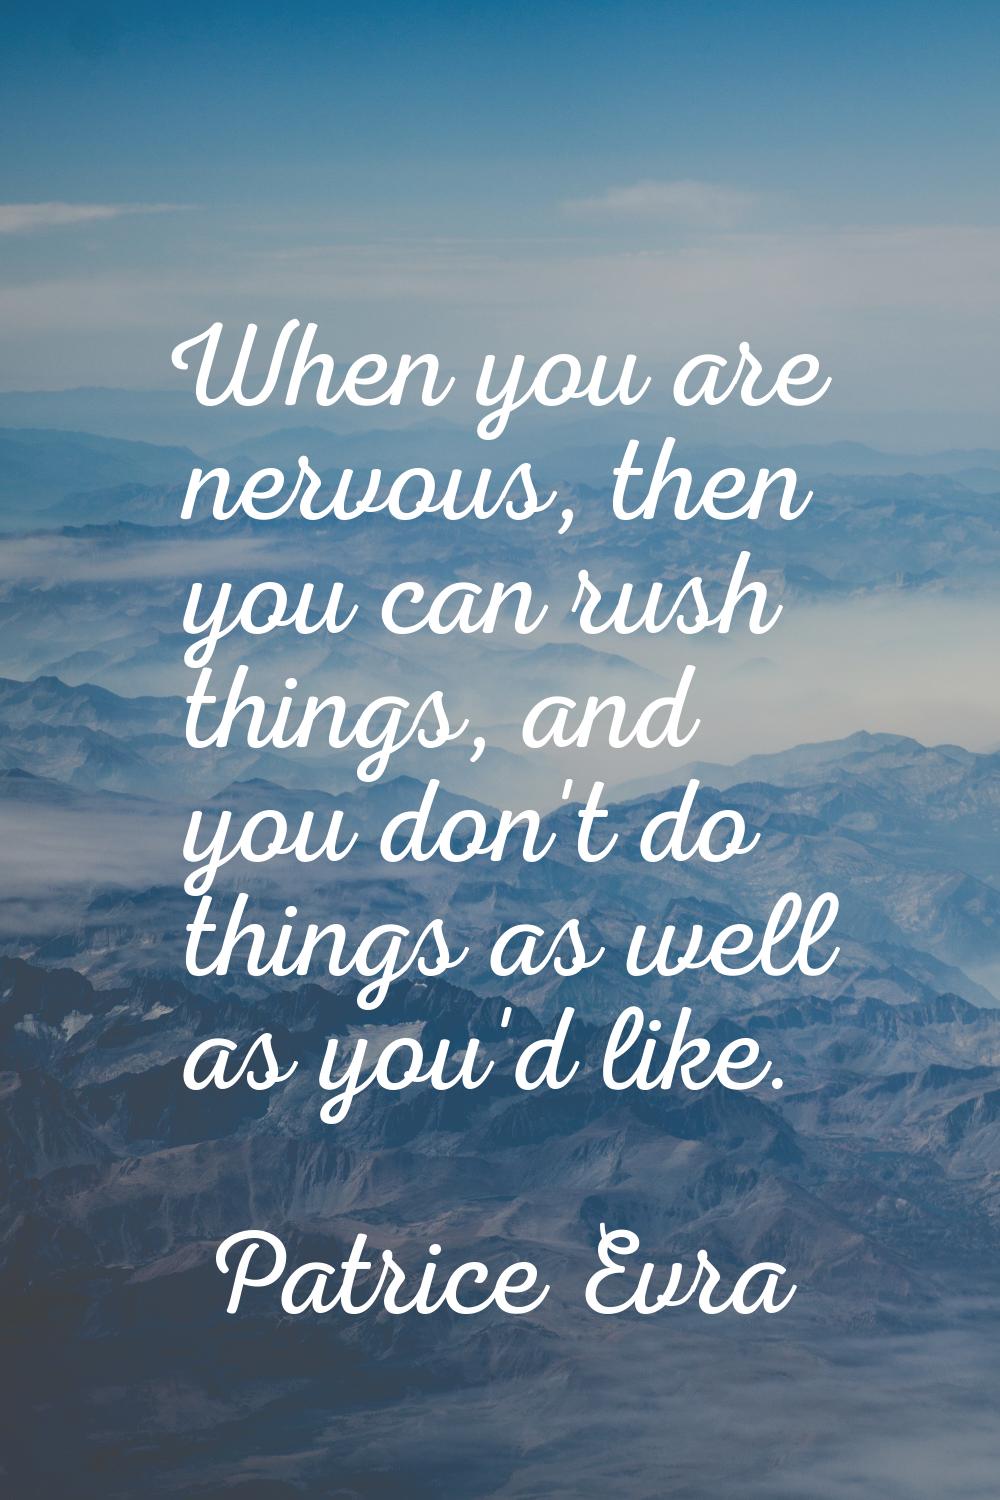 When you are nervous, then you can rush things, and you don't do things as well as you'd like.